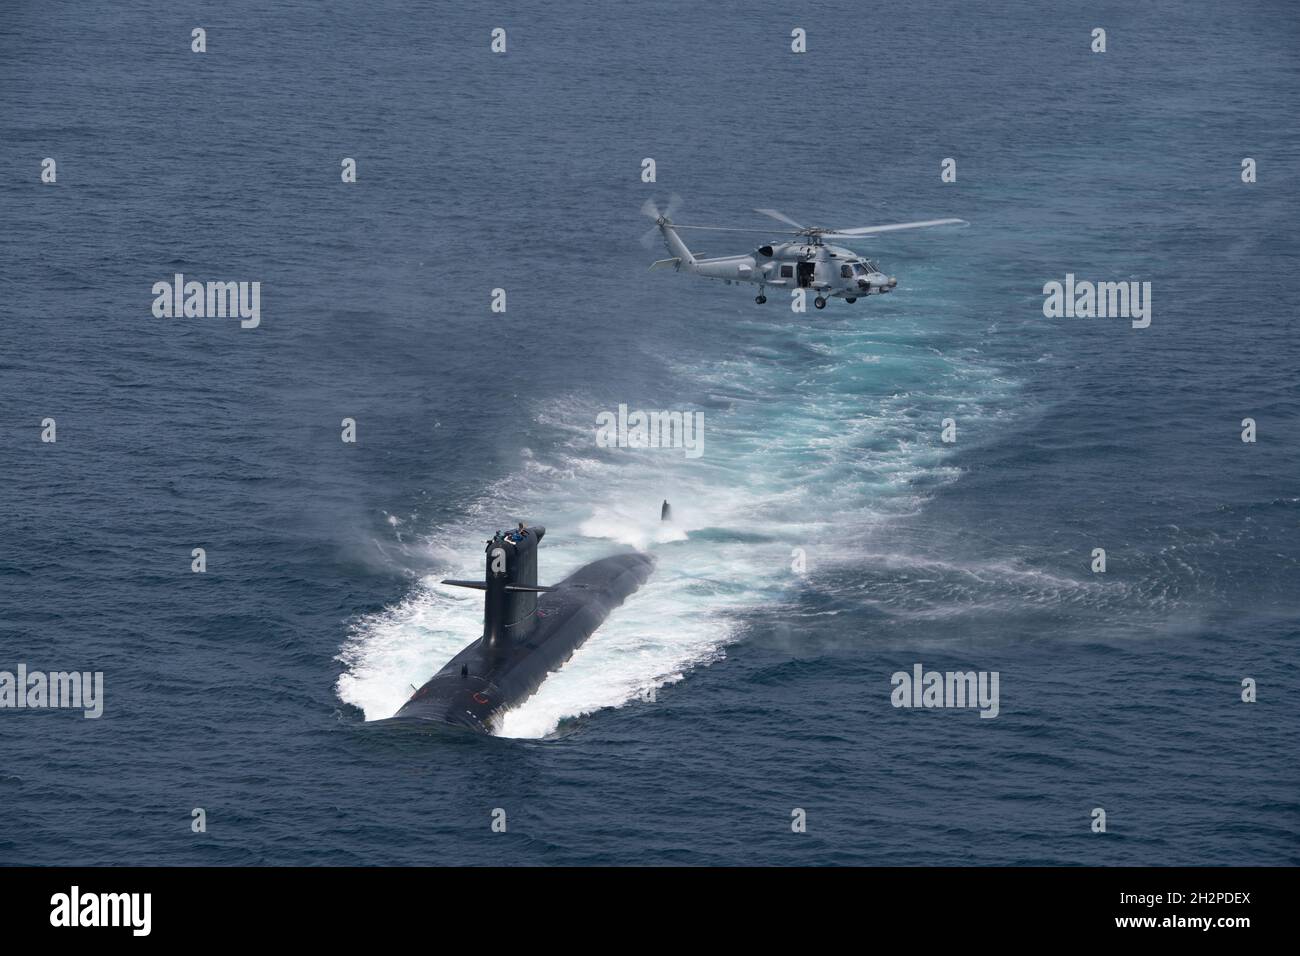 San Diego, United States. 16 August, 2021. A U.S. Navy MH-60R Seahawk helicopter flies over a Chilean Navy Scorpene Class Submarine CS Carrera during Diesel-Electric Submarine multi-national Initiative Hoist Exercise 2021 August 16, 2021 near San Diego, California.  Credit: MC2 Sara Eshleman/U.S. Navy/Alamy Live News Stock Photo